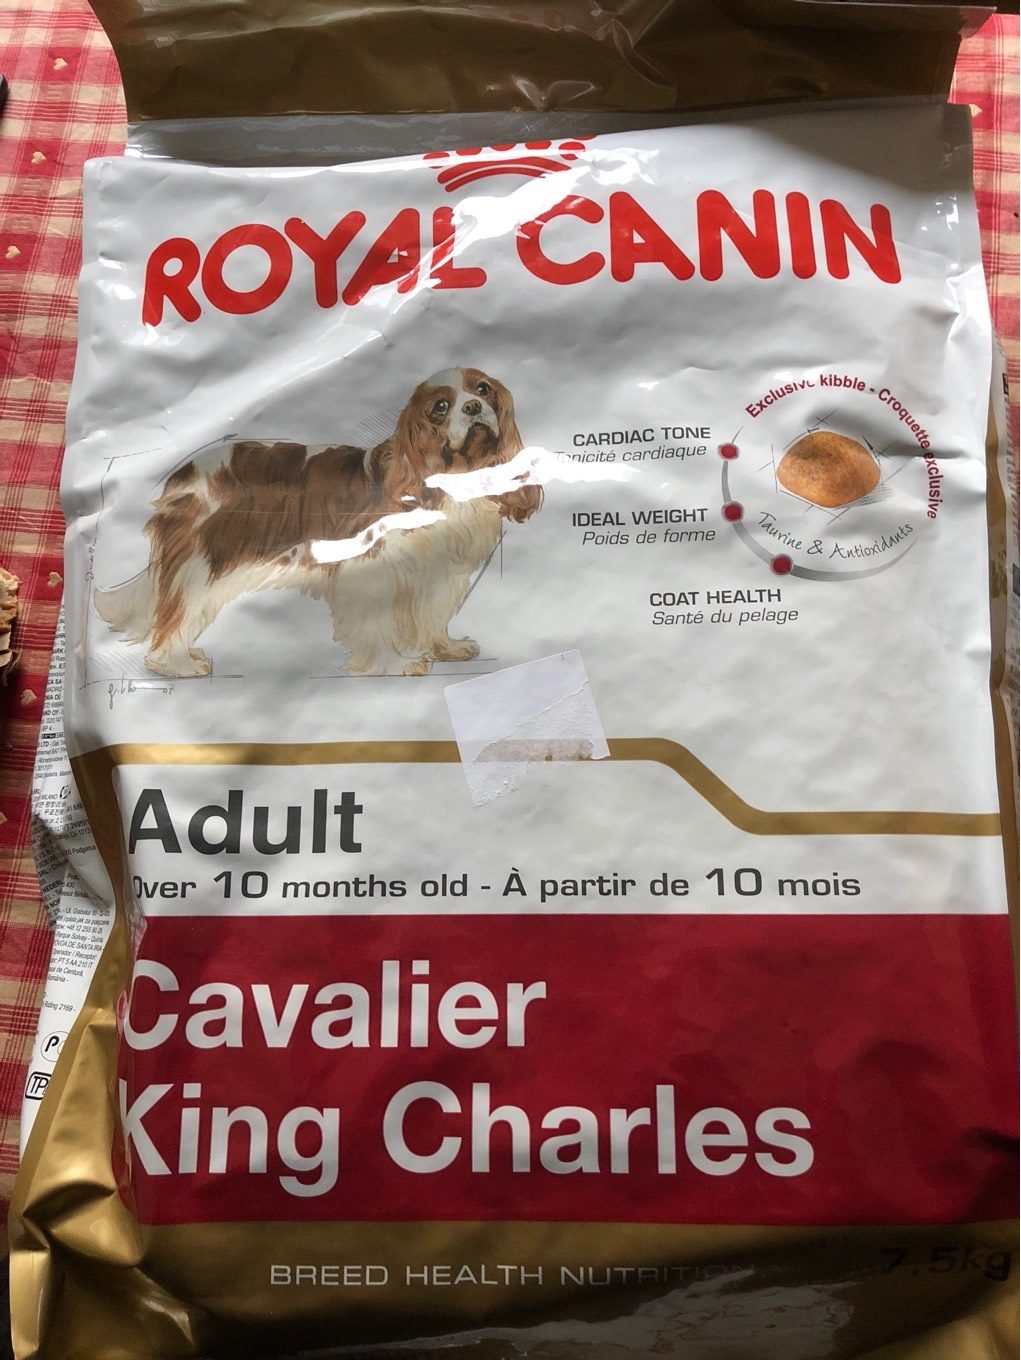 Royal Canin - Croquettes Cavalier King Charles Pour Chien Adulte - 7,5KG - Product - fr